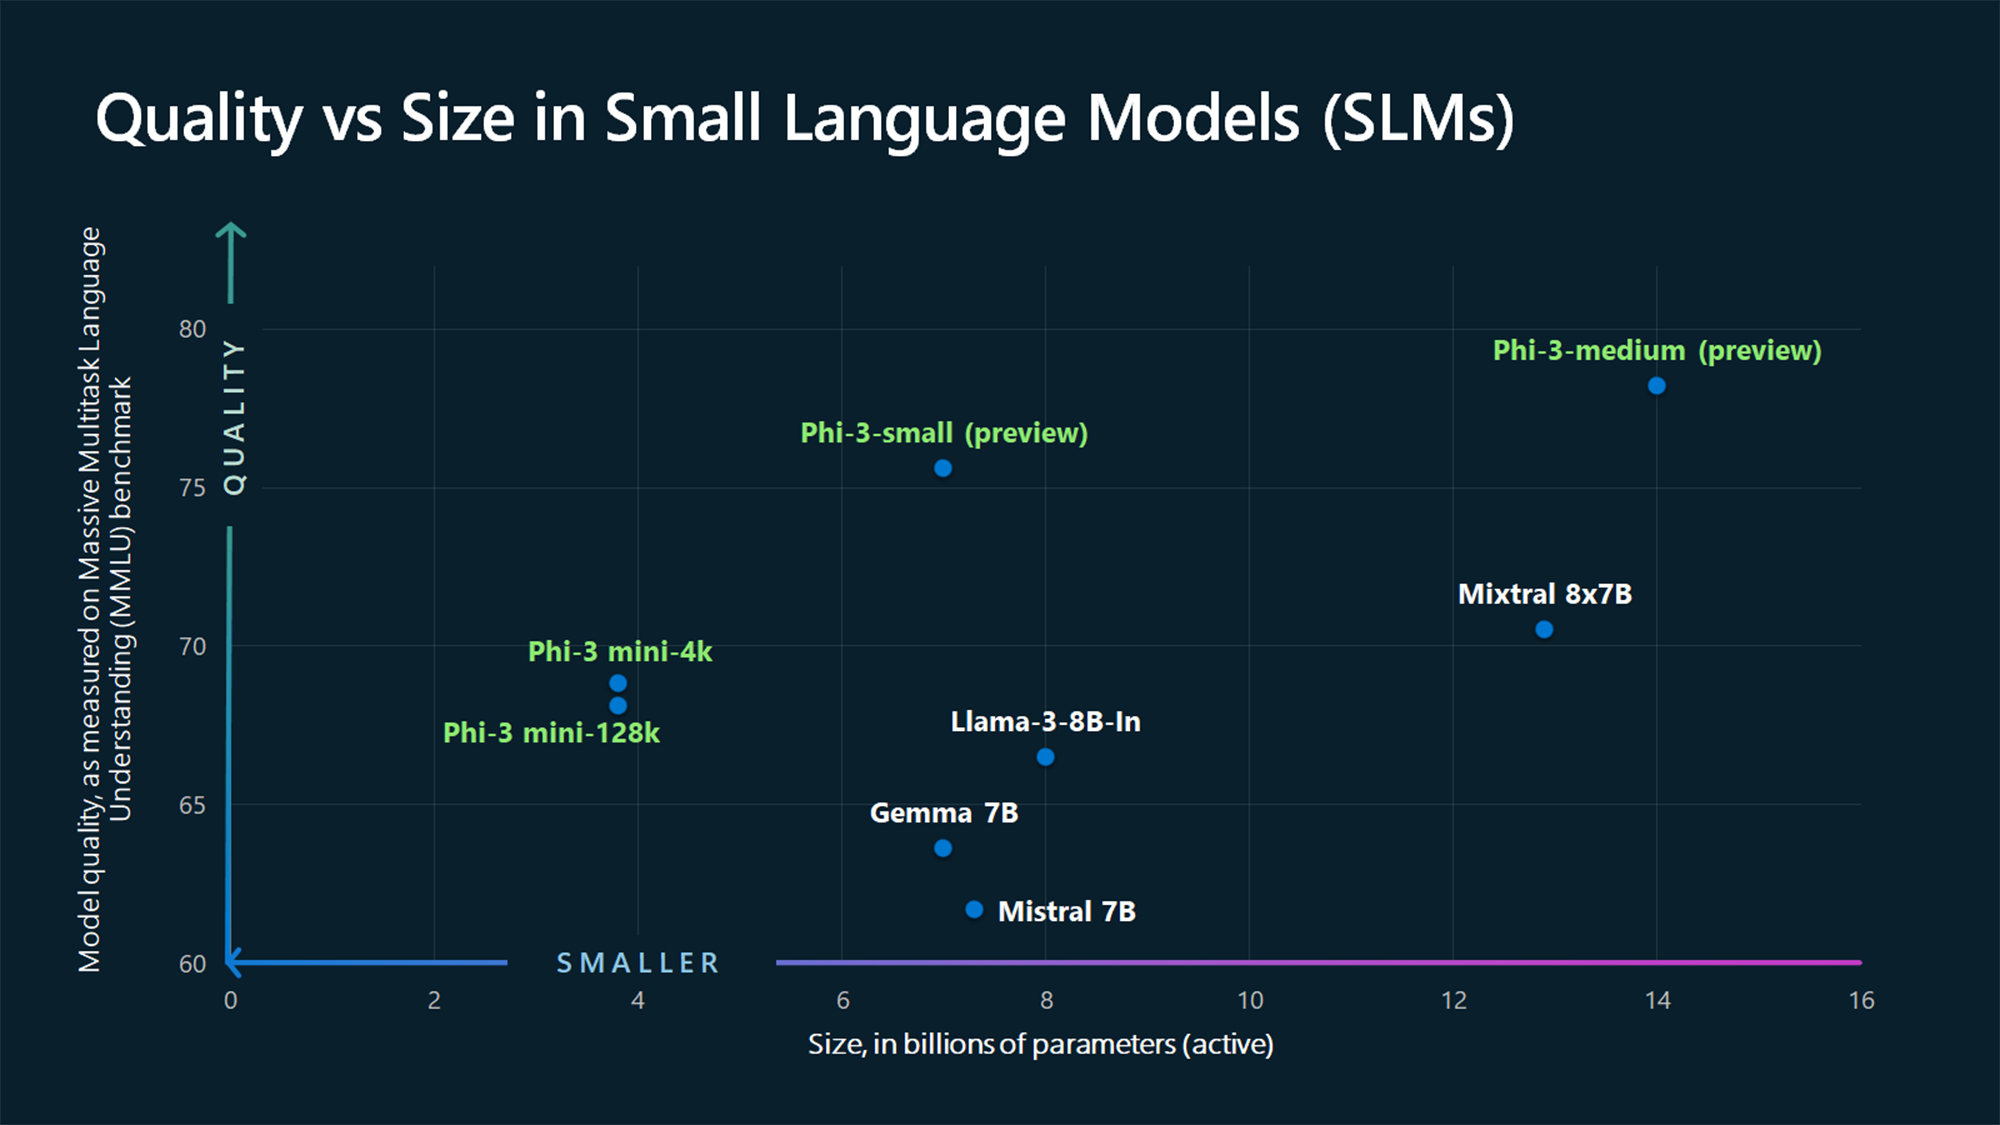 Graphic showing Phi-3 models compare to other models of similar size.